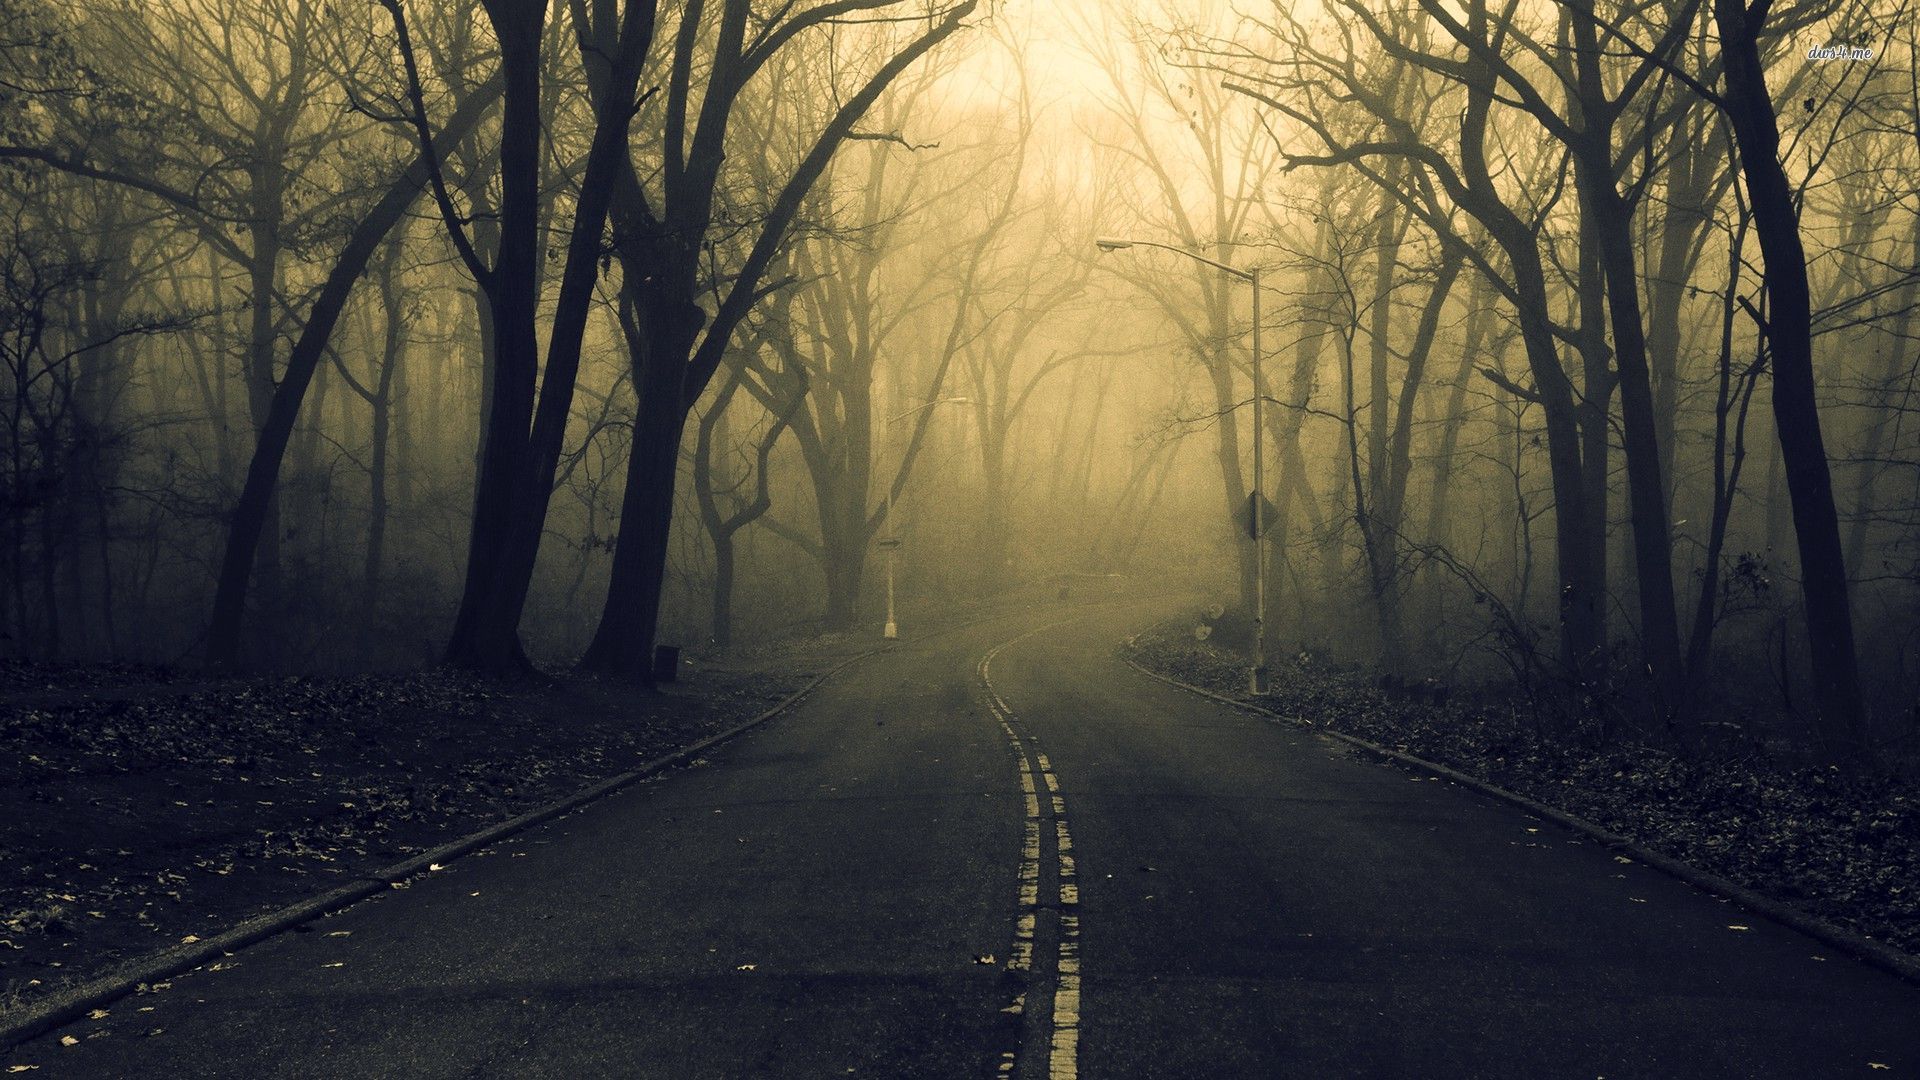 Road through the misty forest wallpaper - Nature wallpapers -